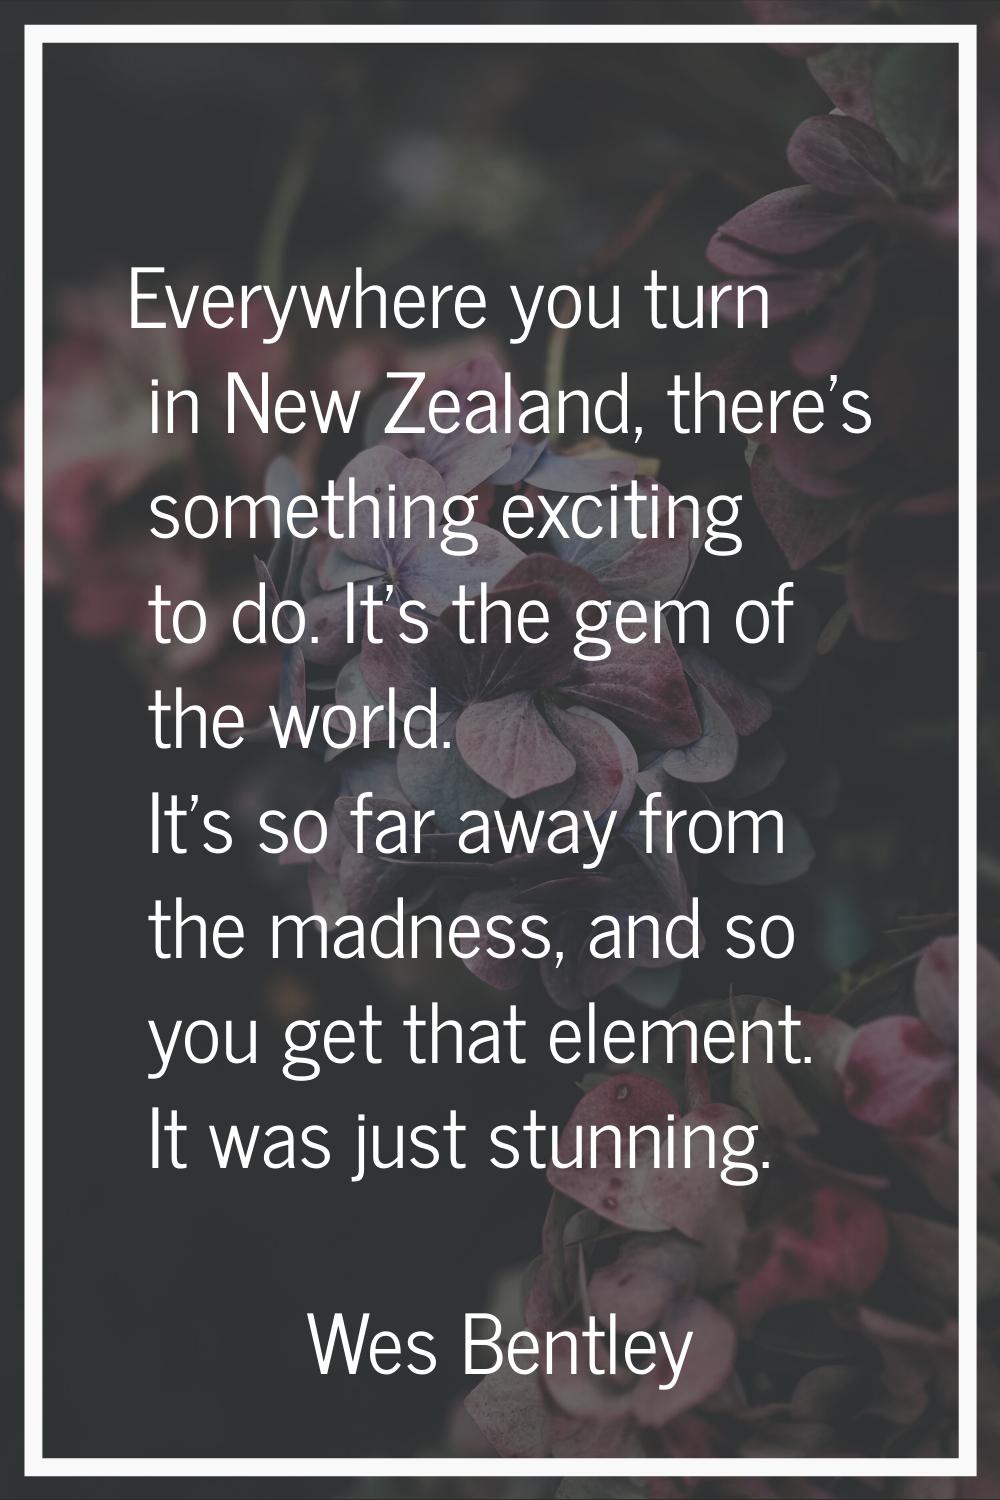 Everywhere you turn in New Zealand, there's something exciting to do. It's the gem of the world. It